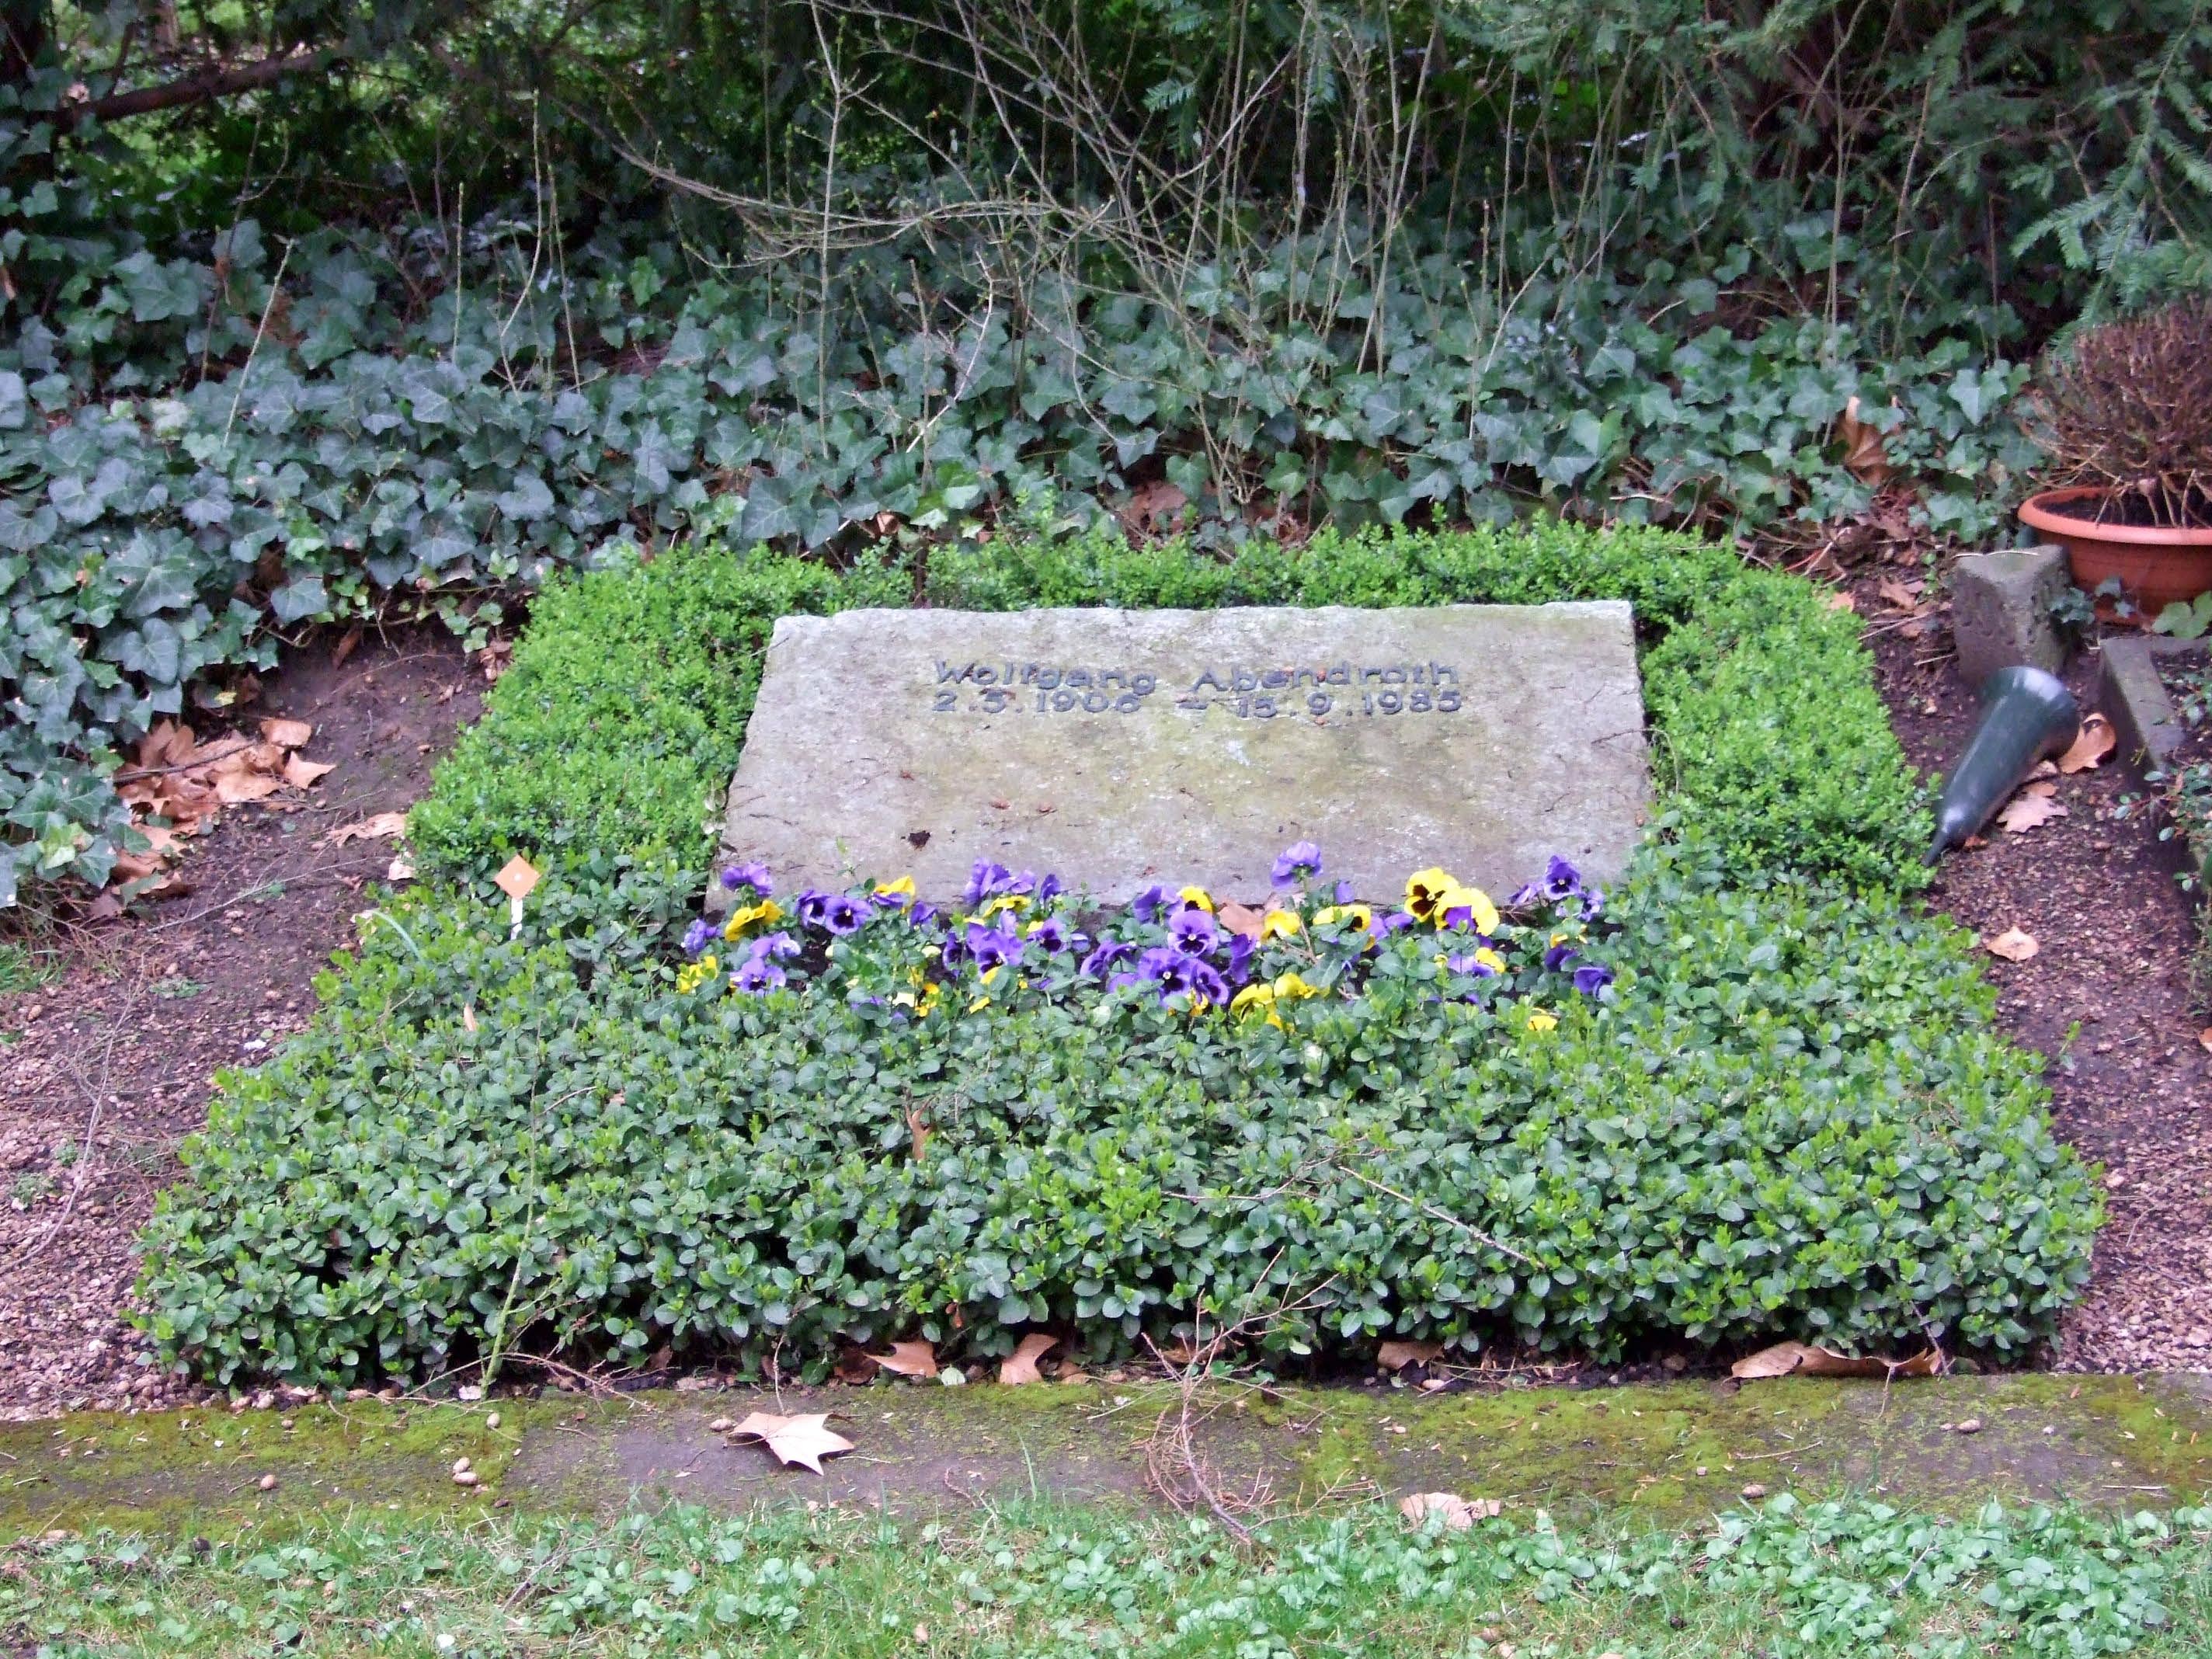 Wolfgang Abendroth's grave